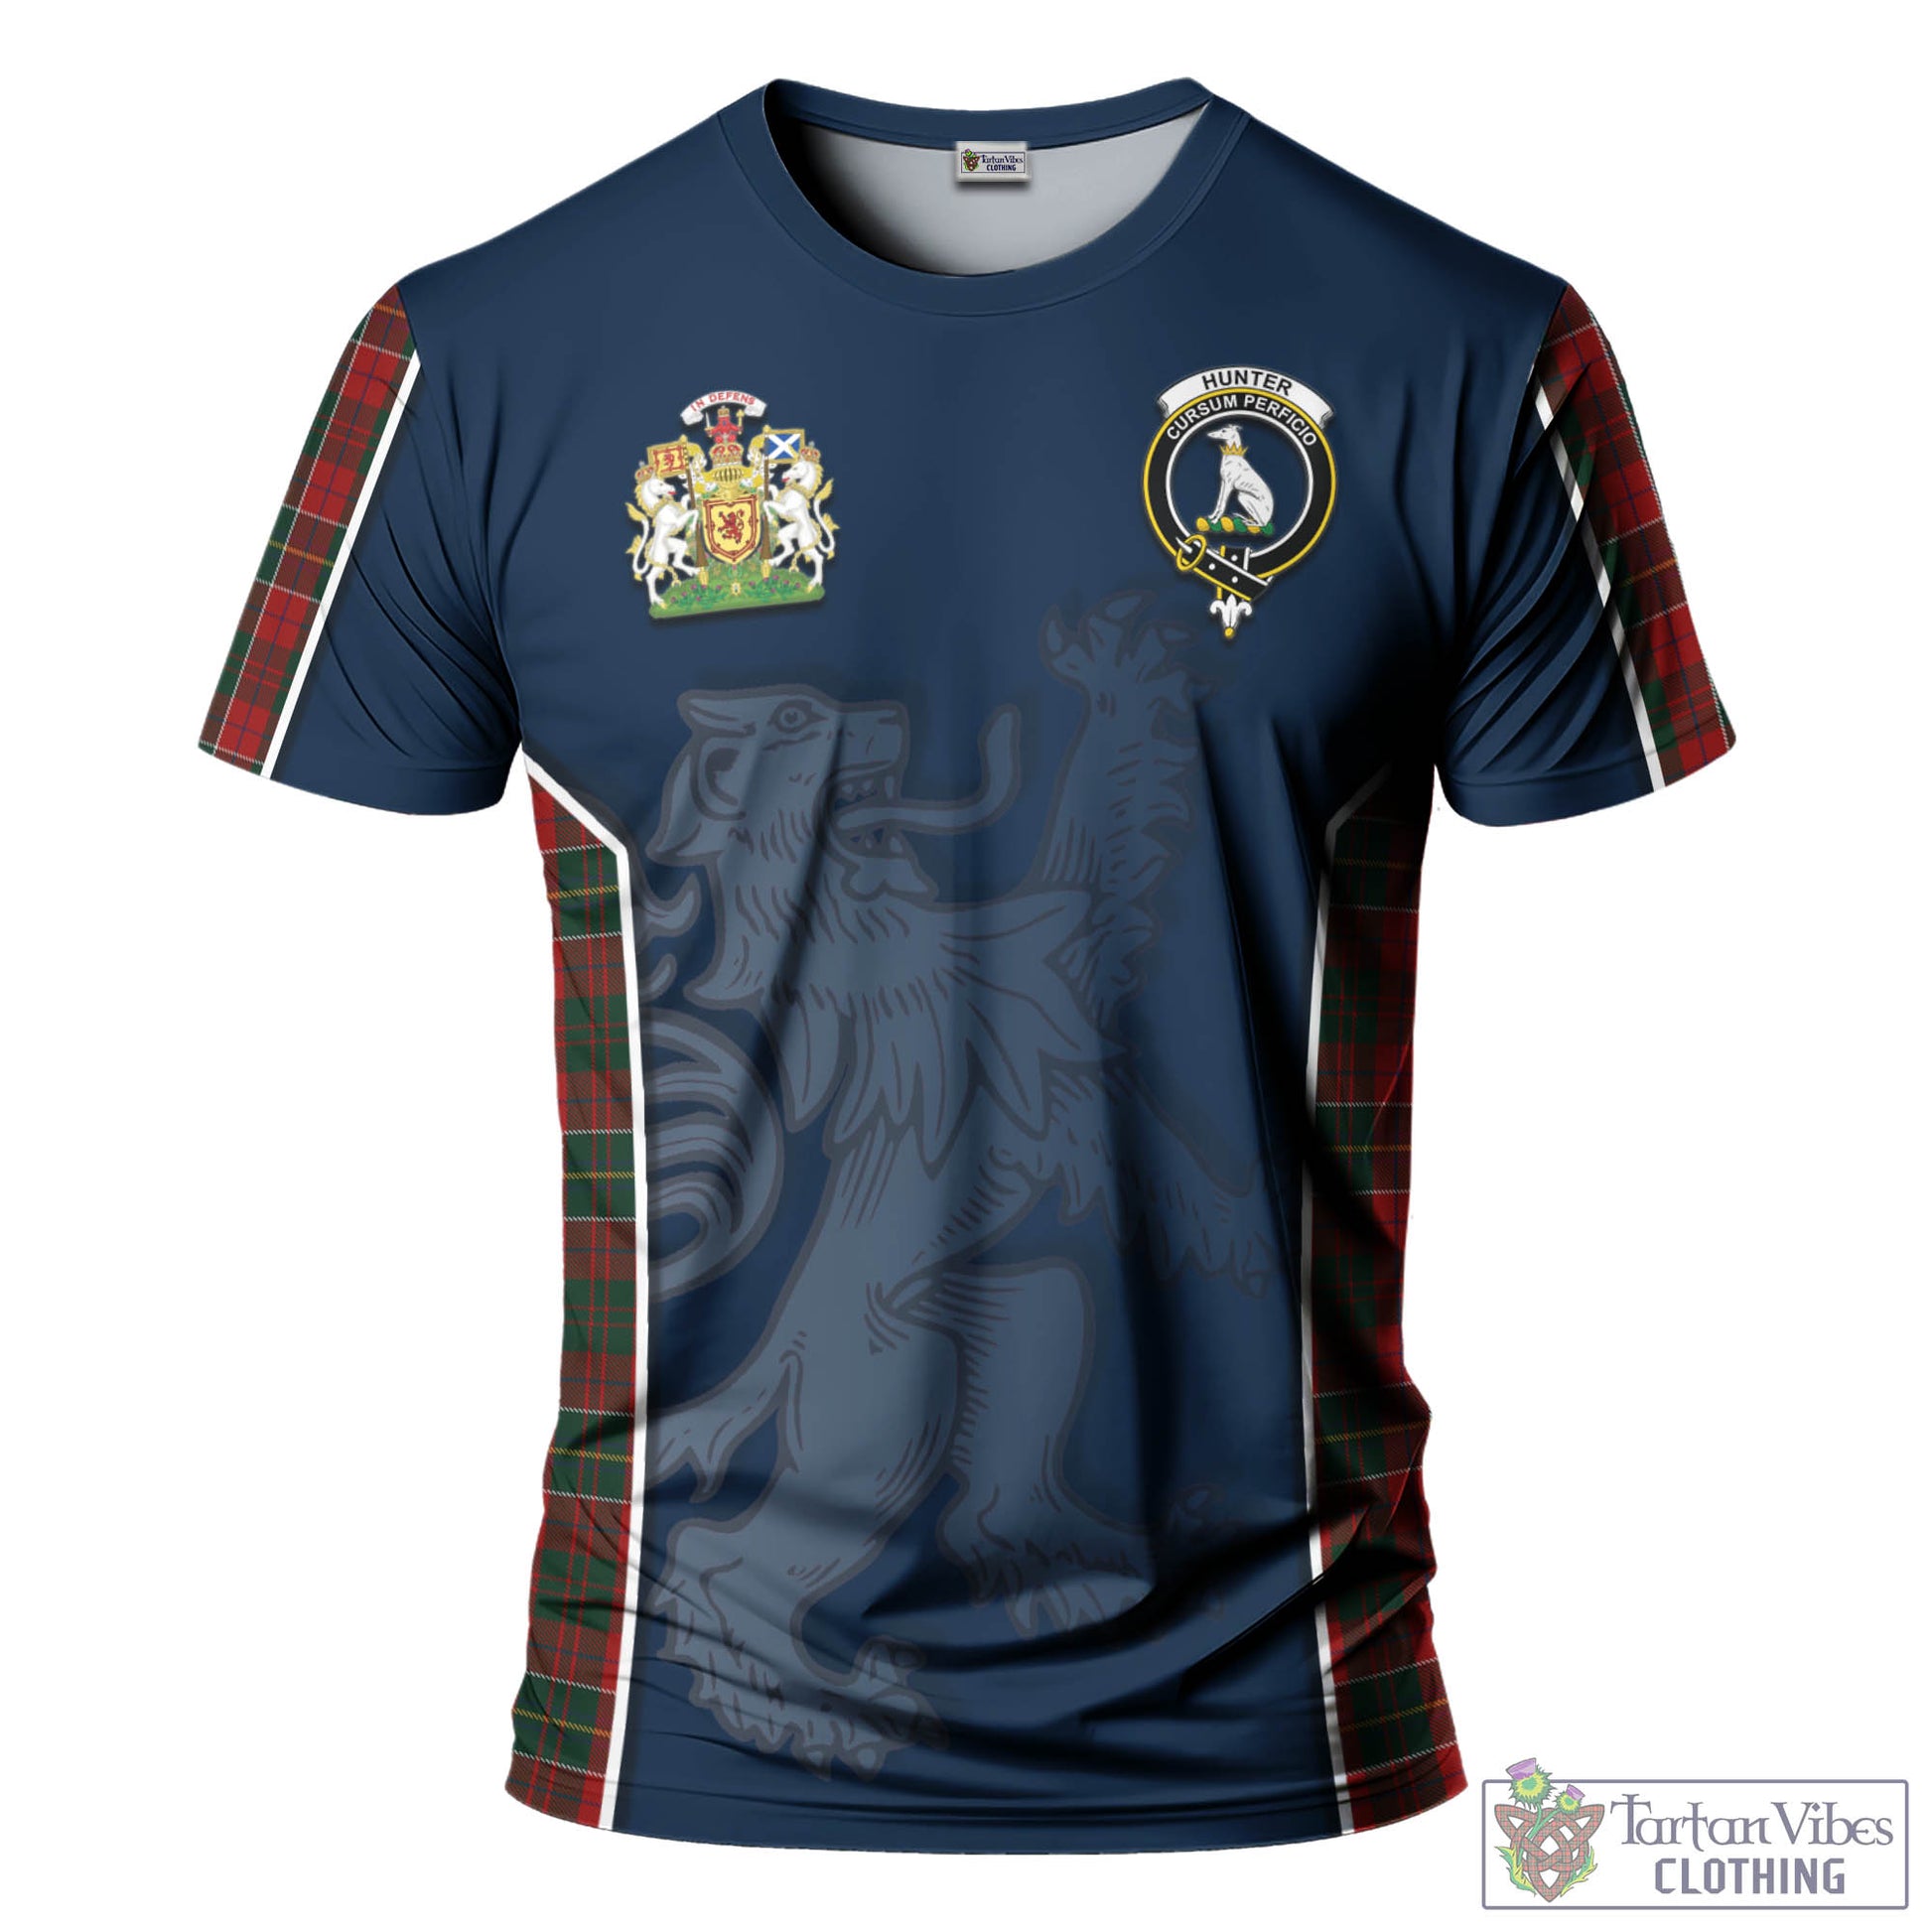 Tartan Vibes Clothing Hunter USA Tartan T-Shirt with Family Crest and Lion Rampant Vibes Sport Style